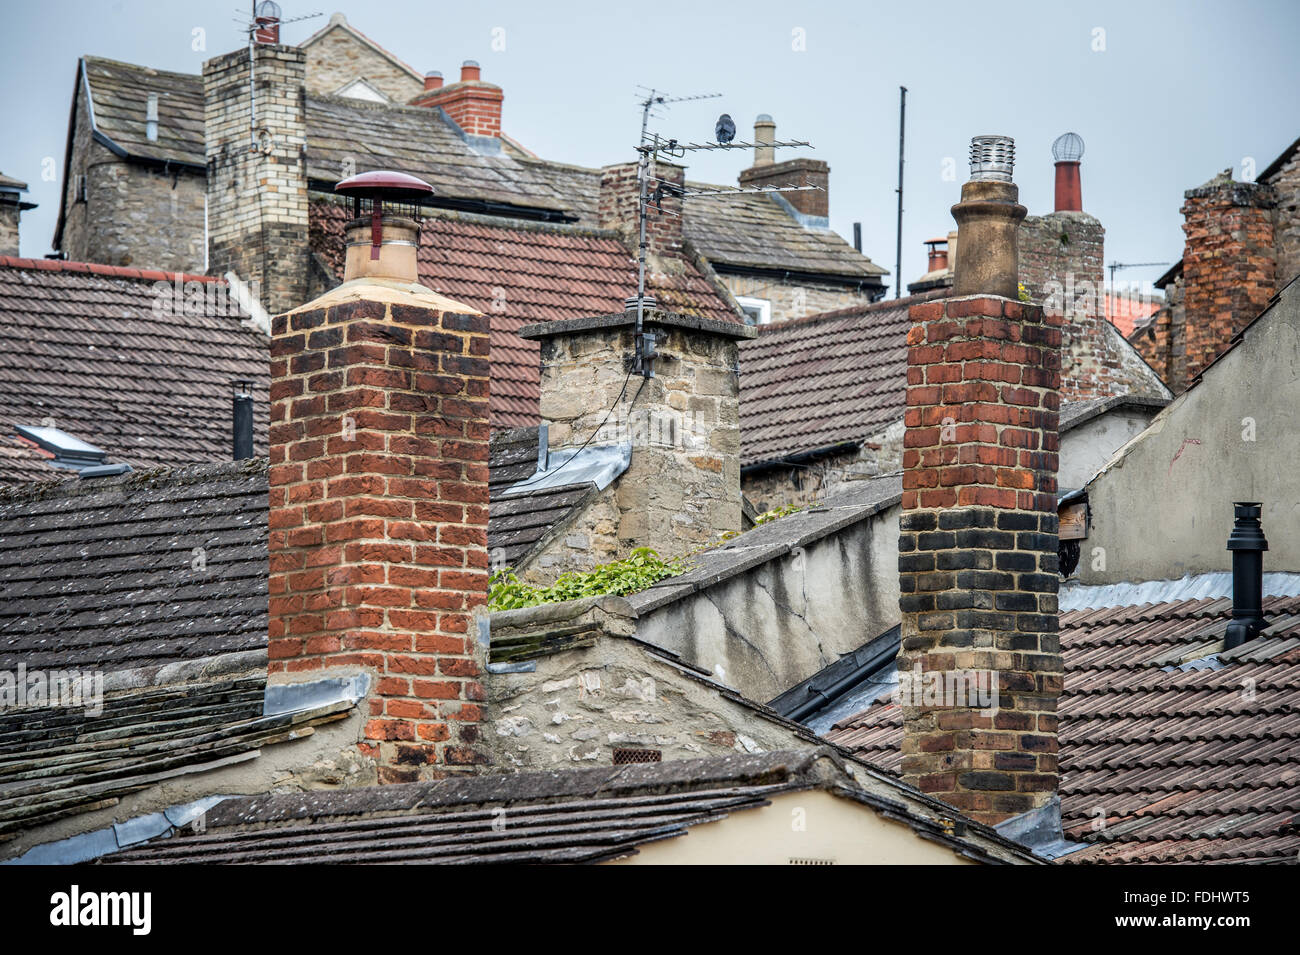 Rooftops in the City of Richmond, England, UK. Stock Photo